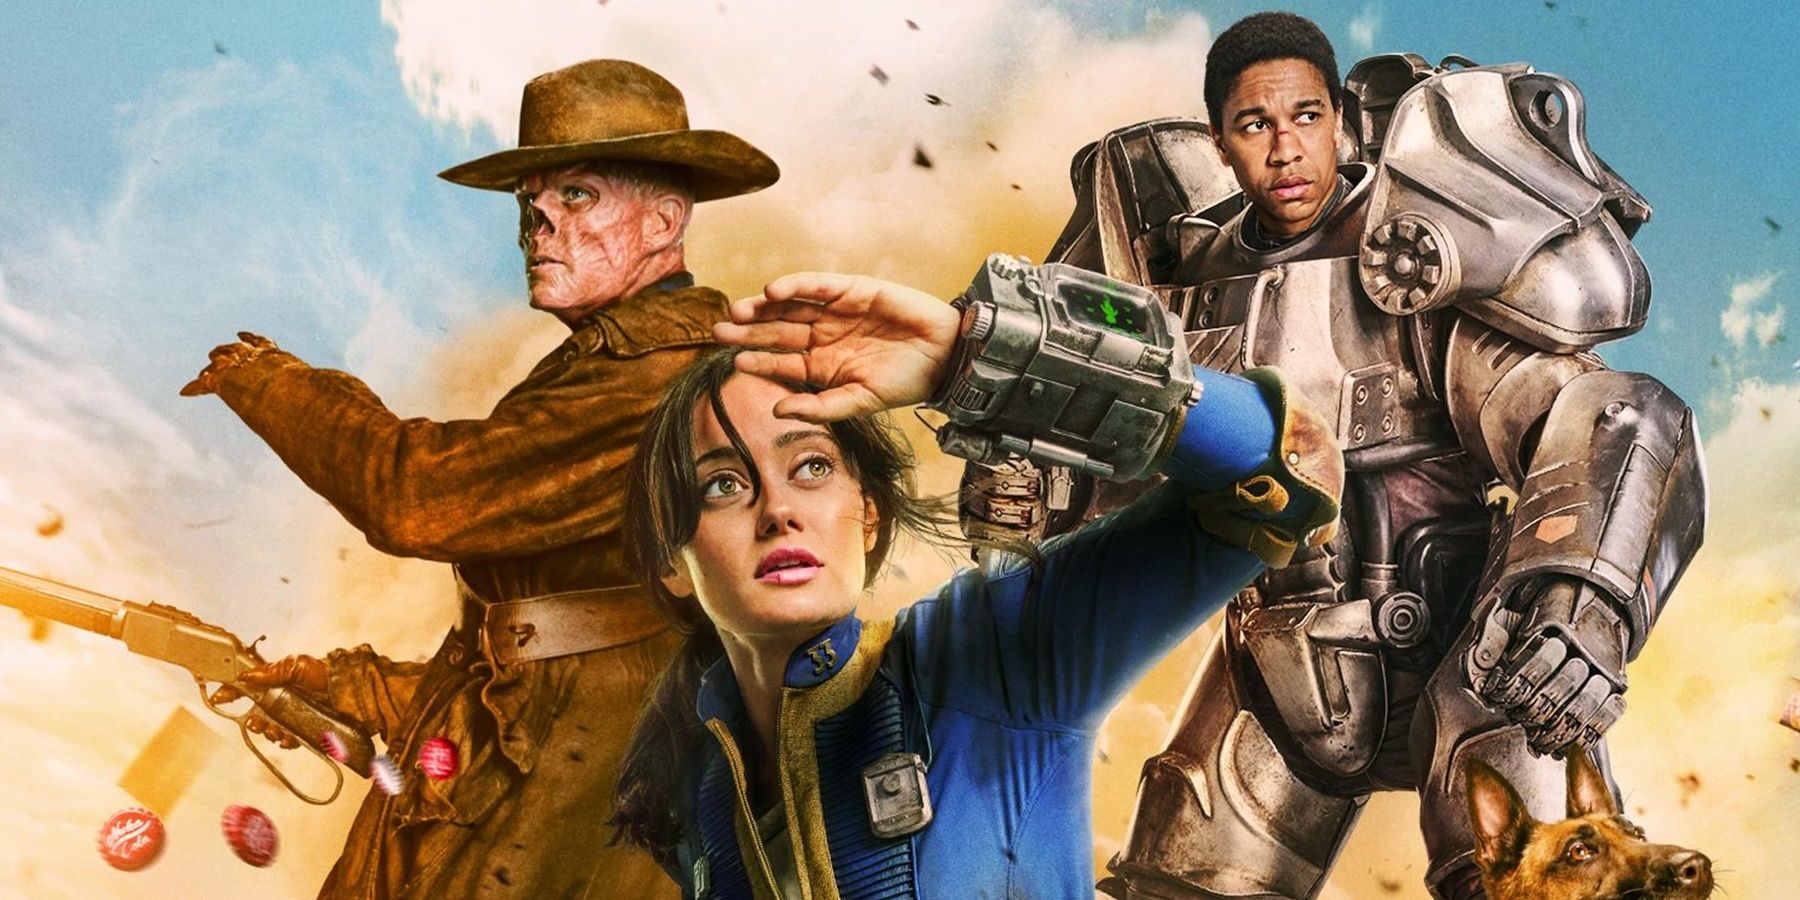 The poster for Fallout on prime video with Lucy, Maximus and The Ghoul.